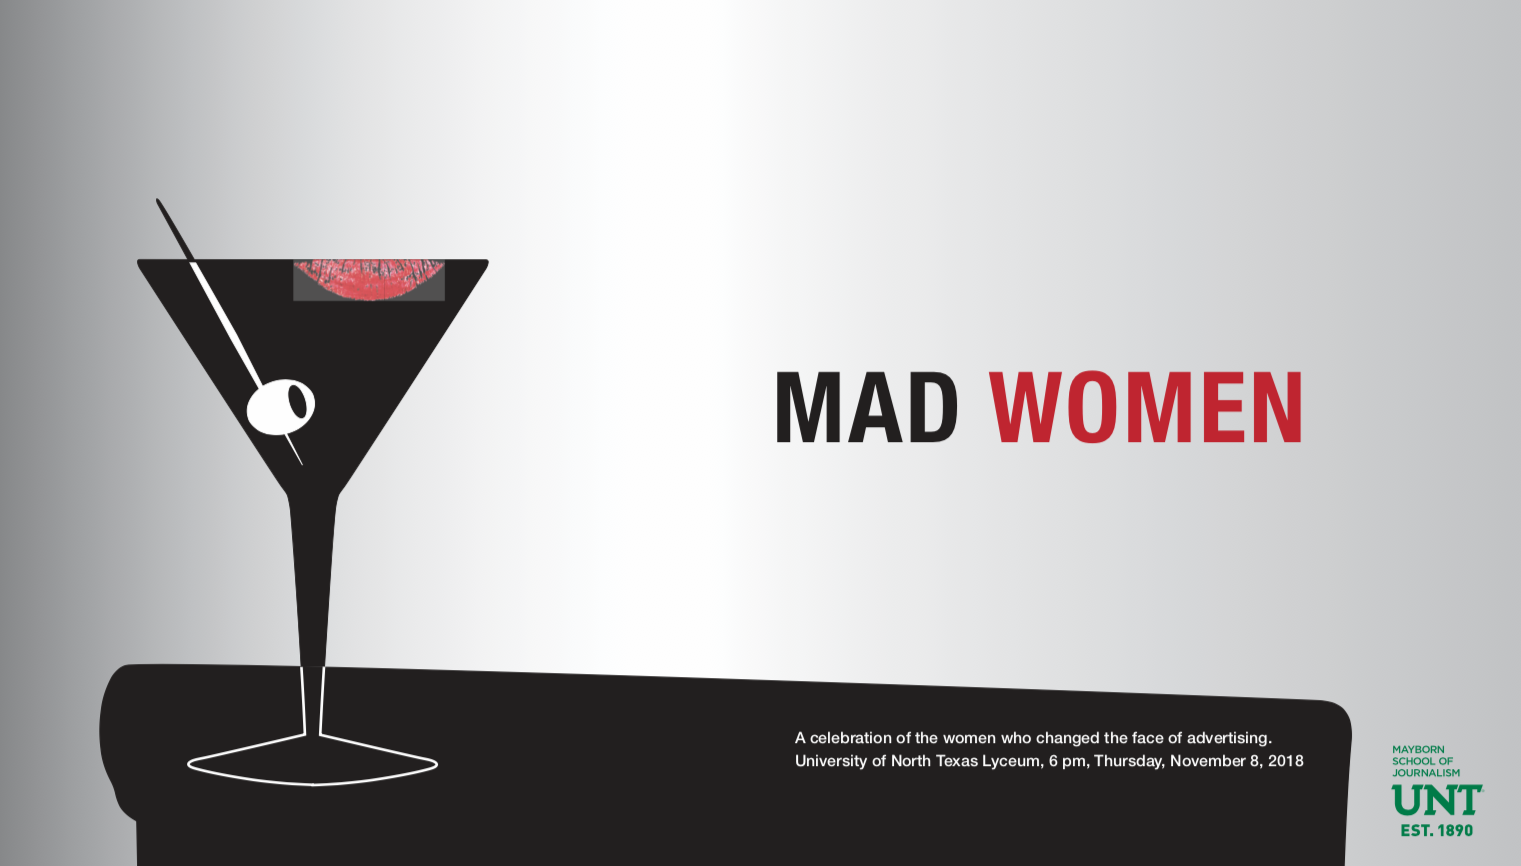 It’s not just Peggy Olsen anymore. Modern Mad Women head to UNT Nov. 8.